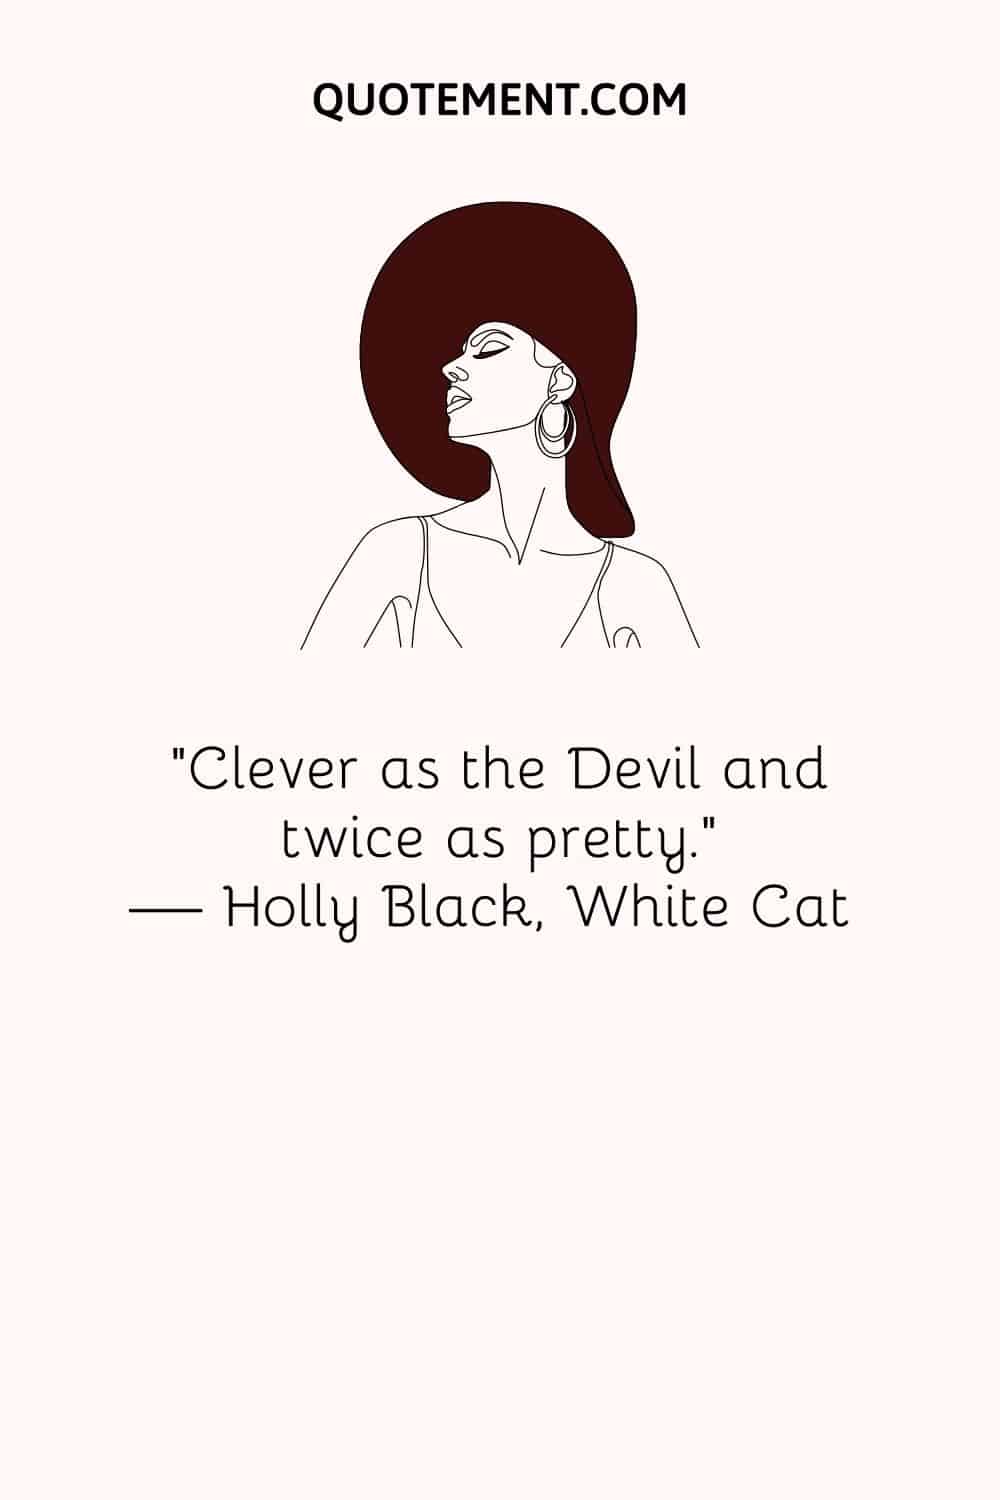 “Clever as the Devil and twice as pretty.” — Holly Black, White Cat